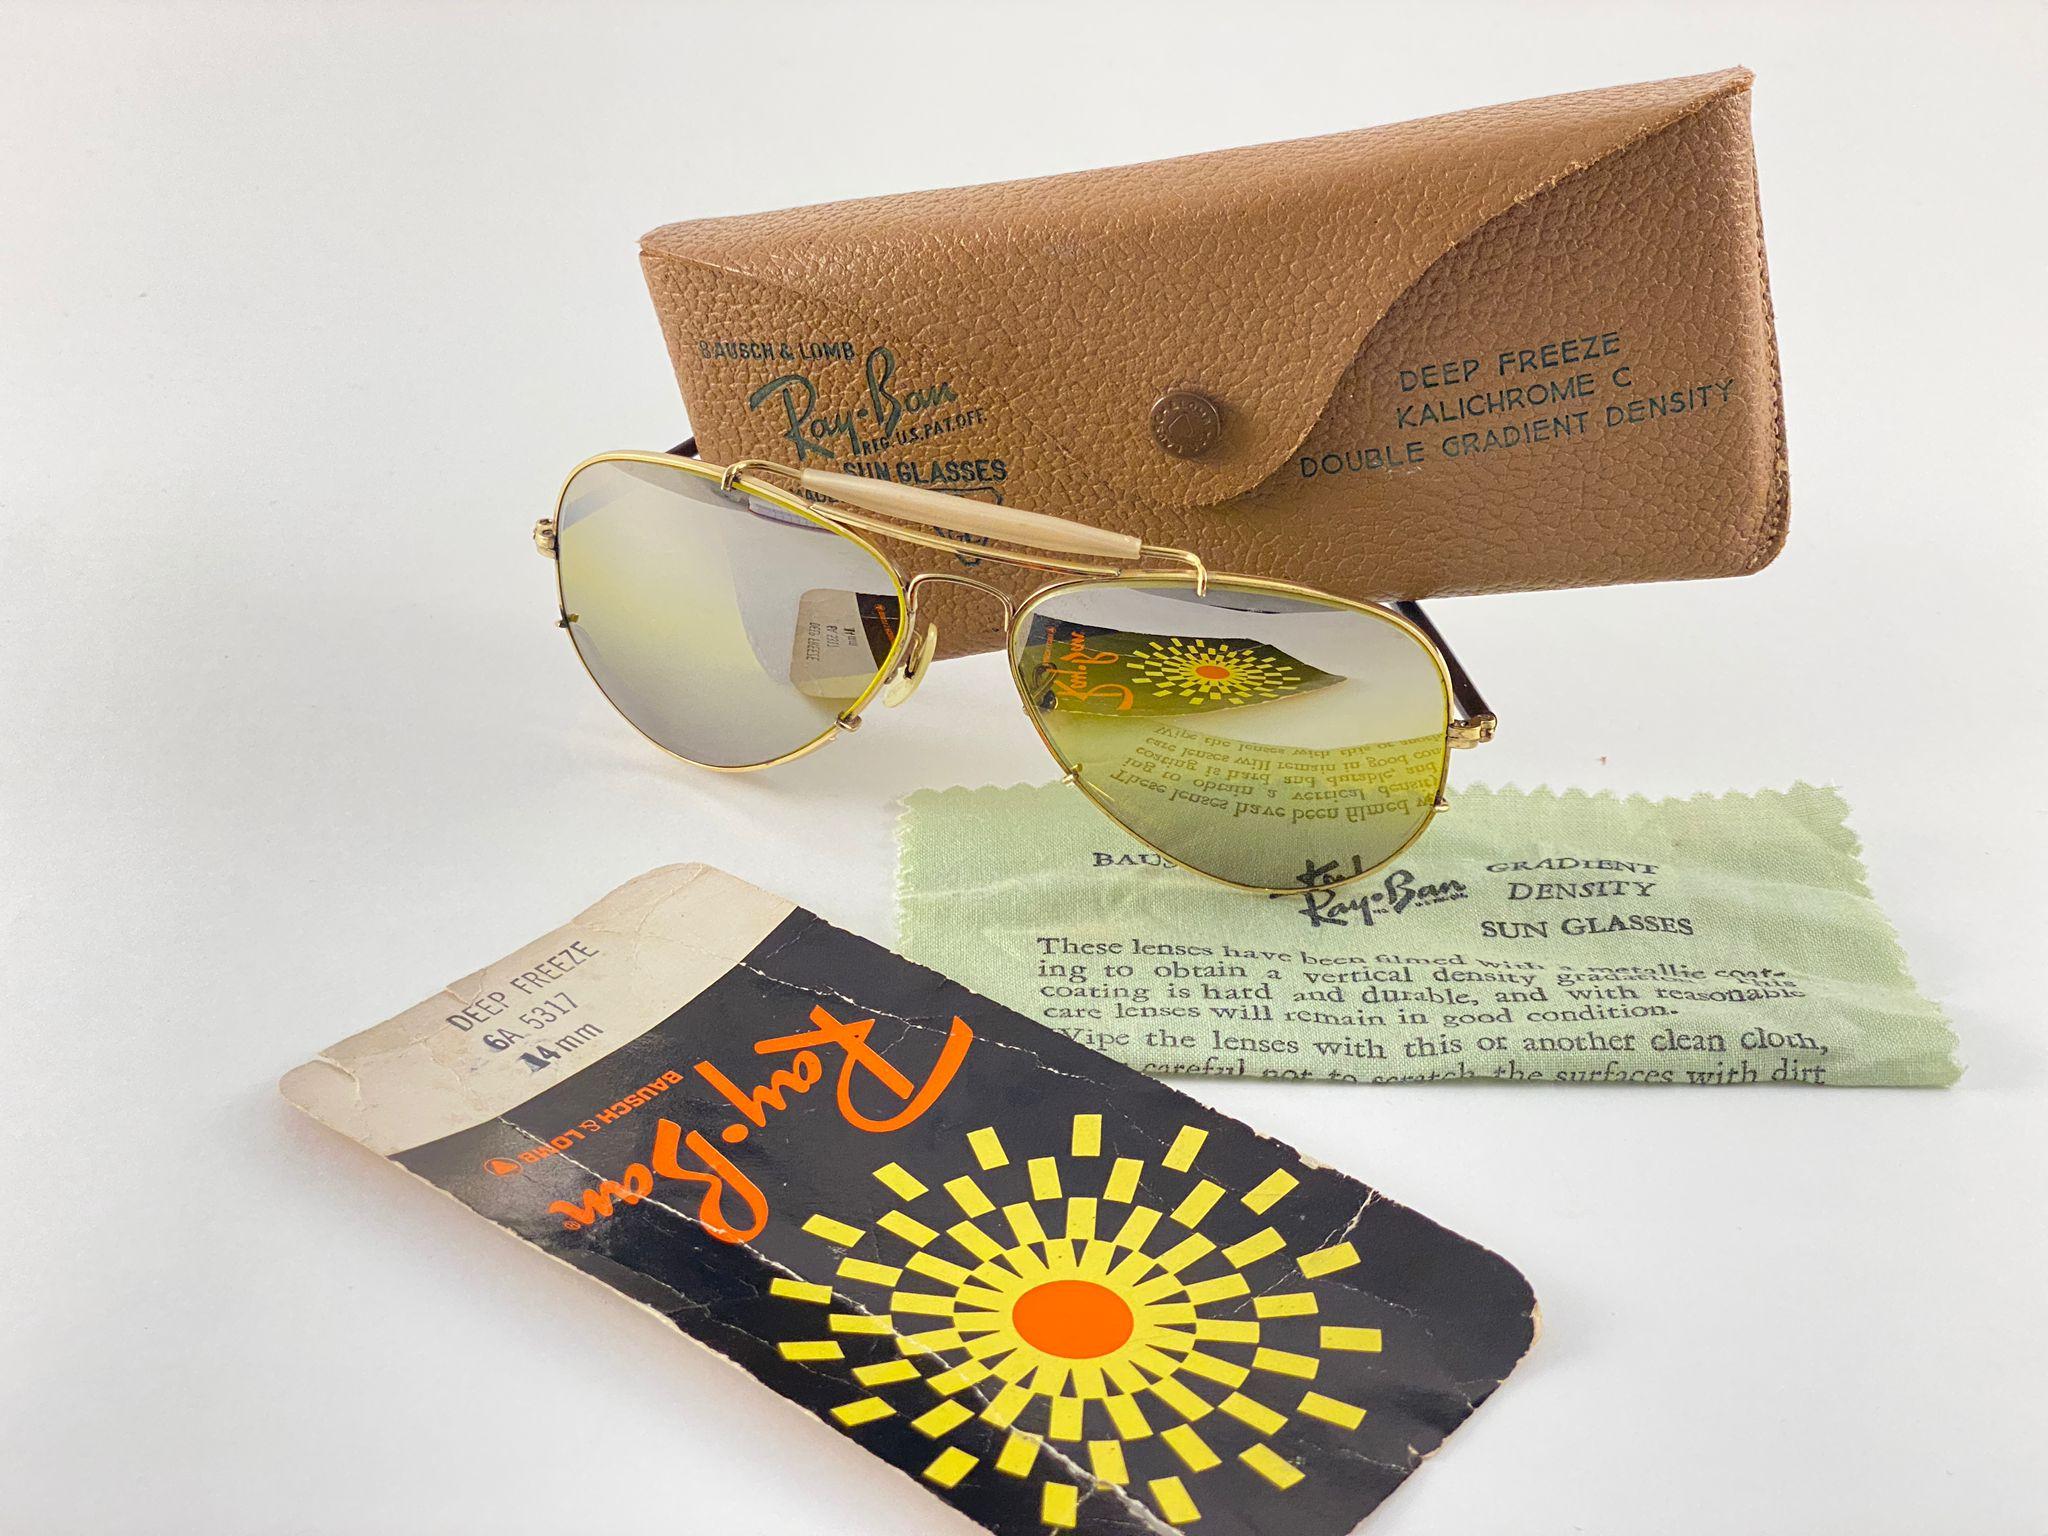 New Ray Ban Deep Freeze 12K Gold Kalichrome Collectors Item USA Sunglasses For Sale 10